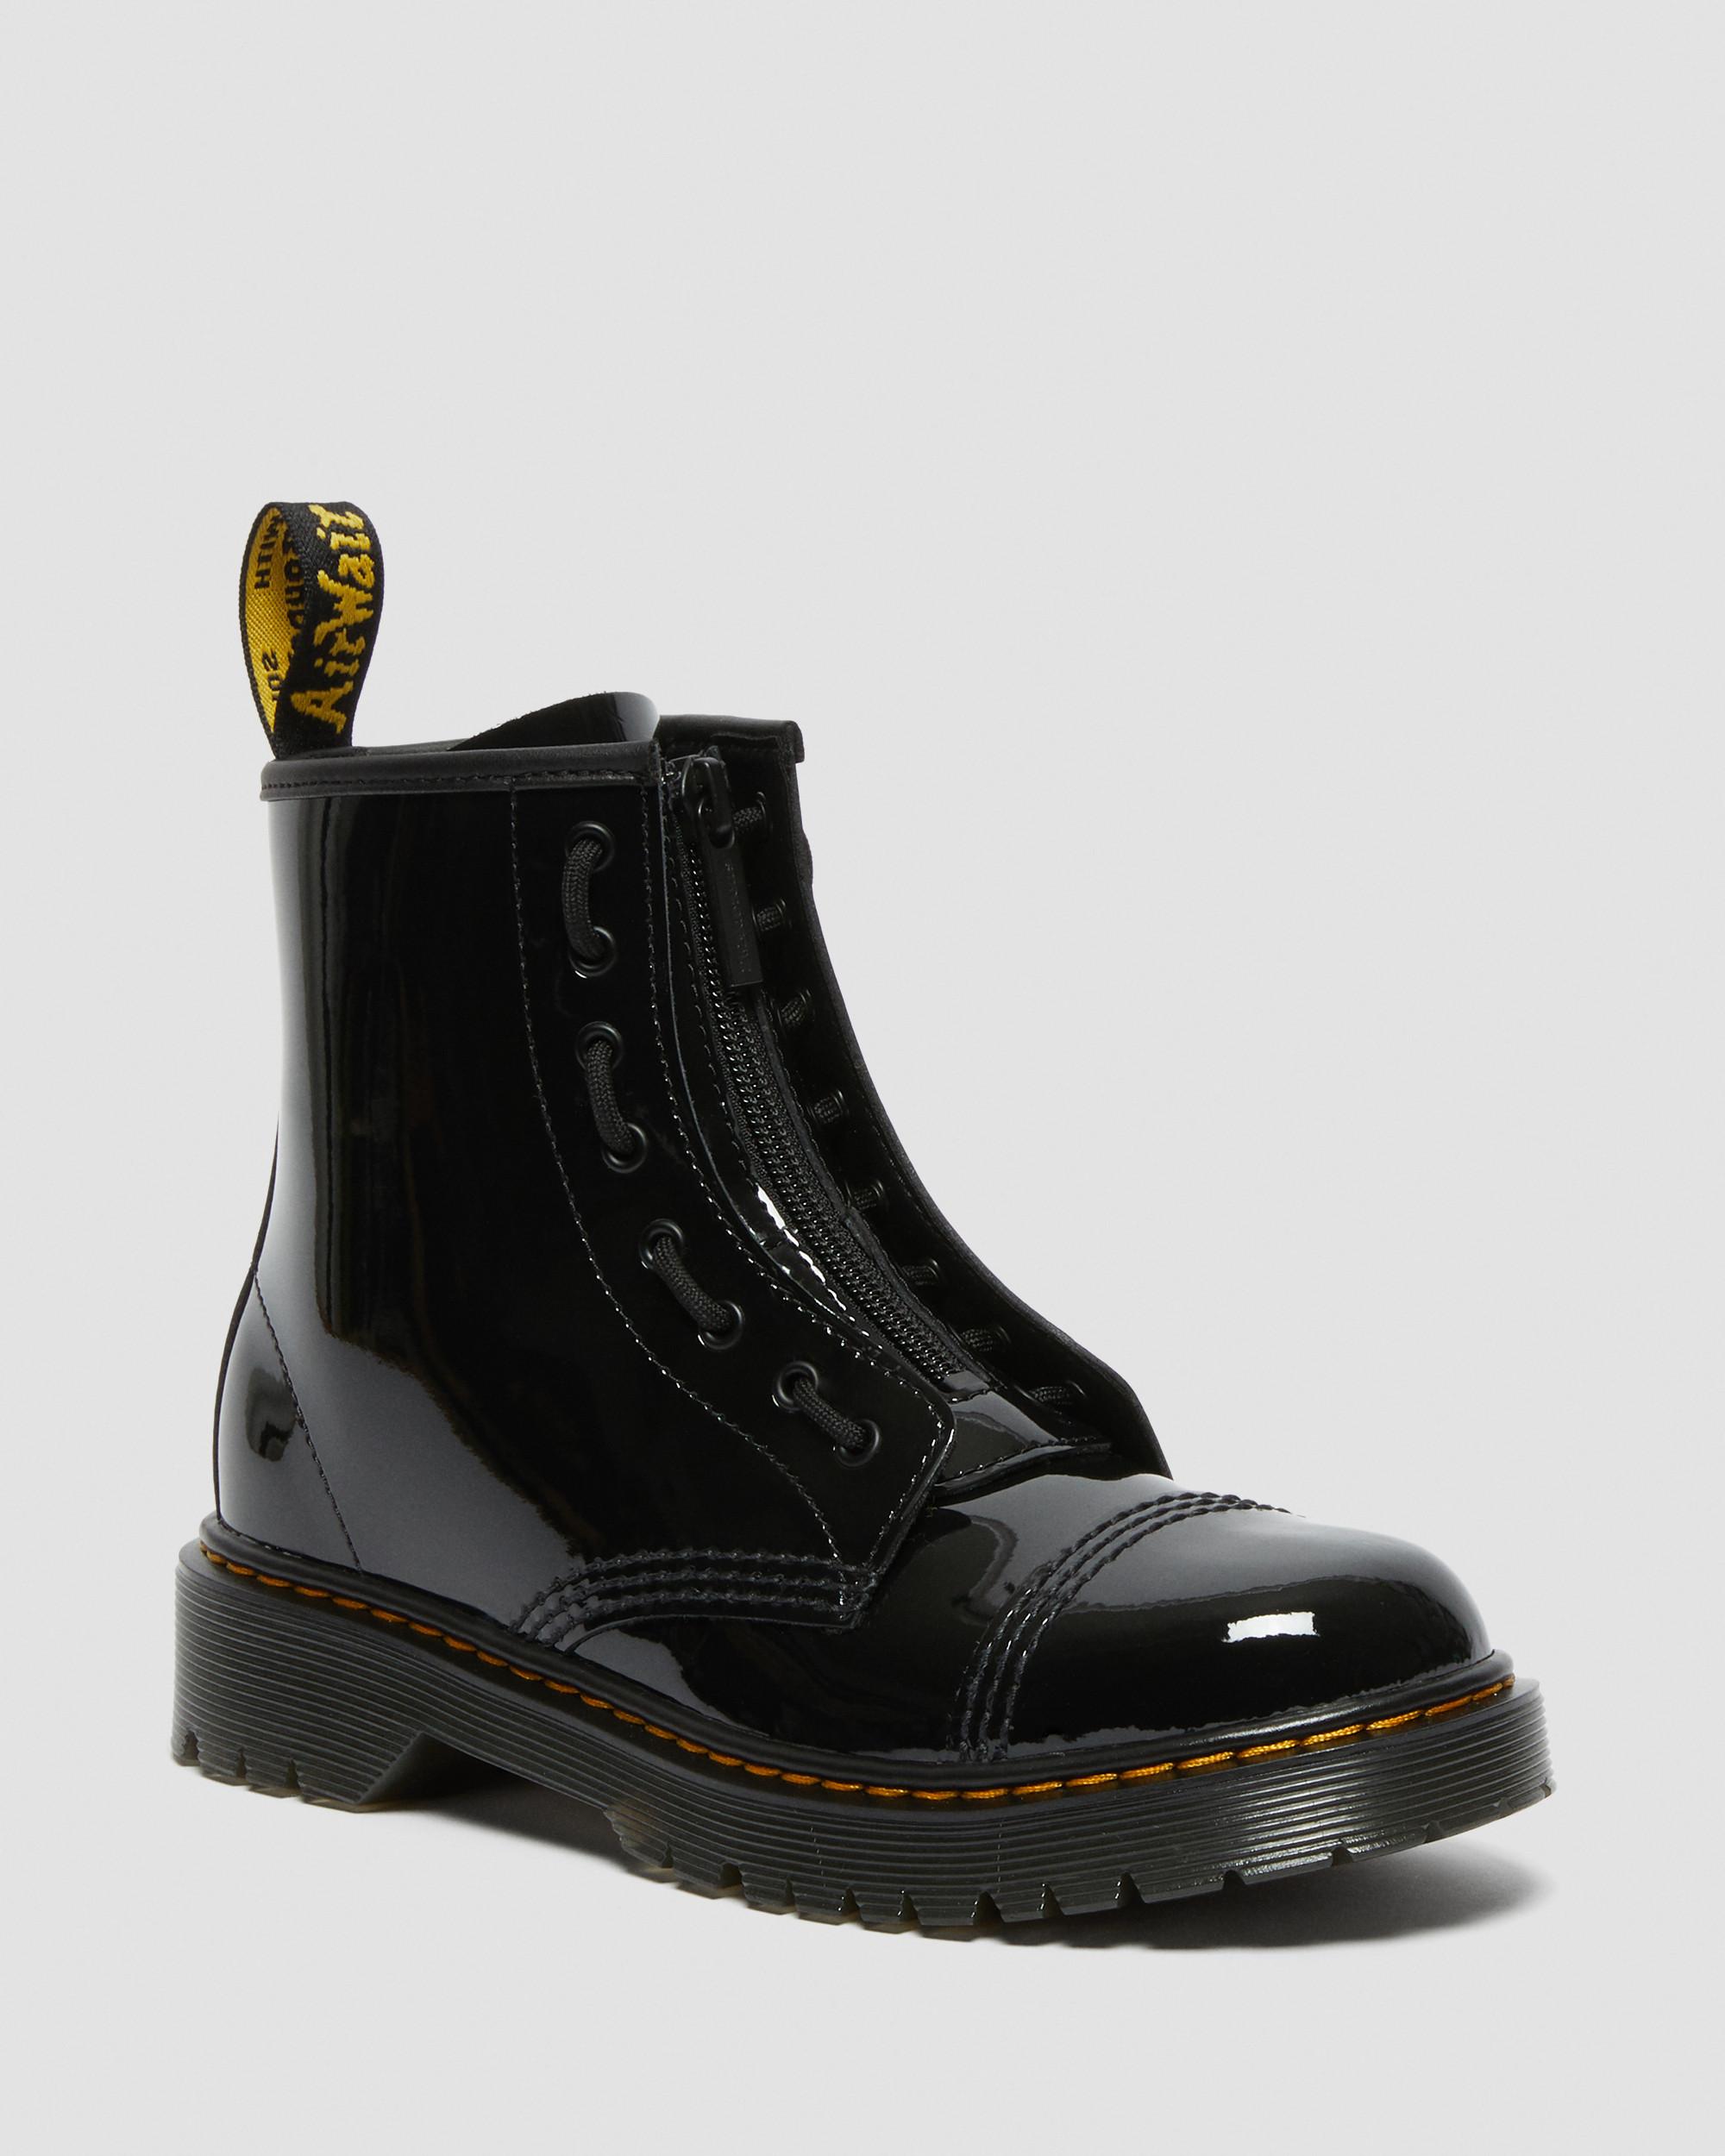 | Youth Leather Lace Black Softy 1460 Boots Up Dr. in Martens T